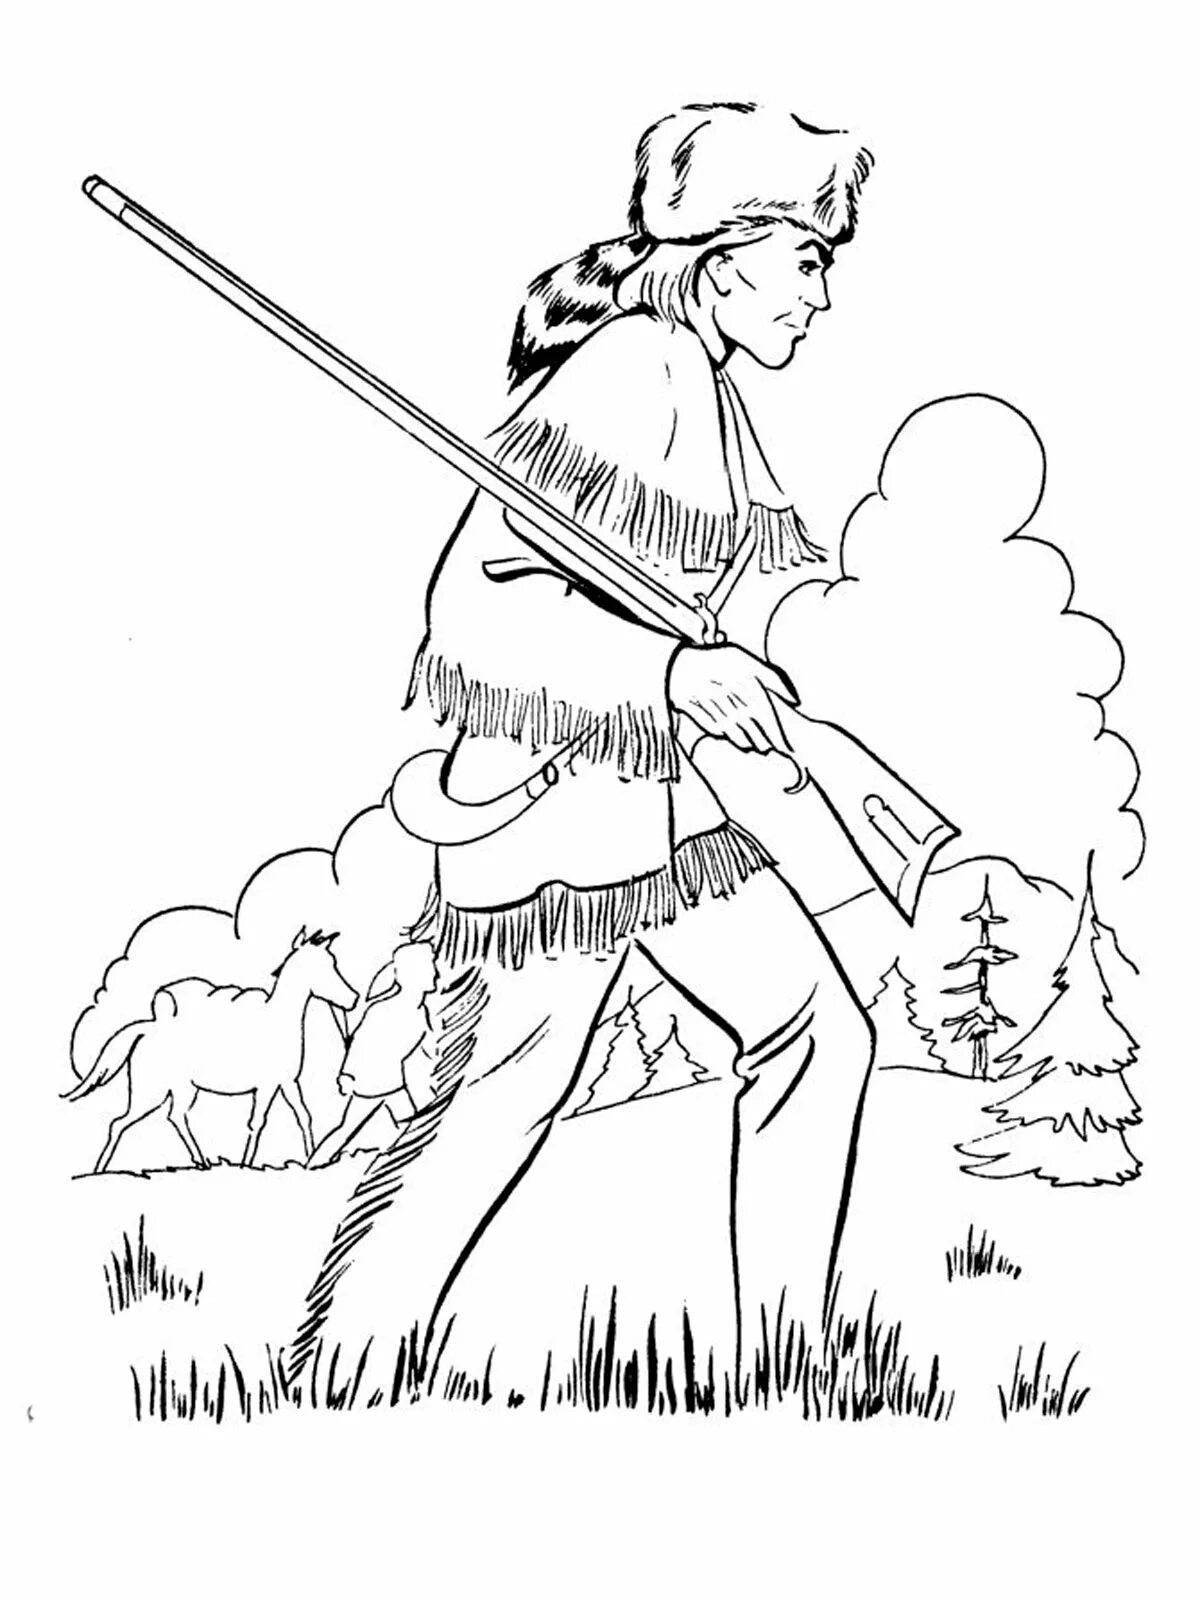 Charming hunter with a gun coloring book